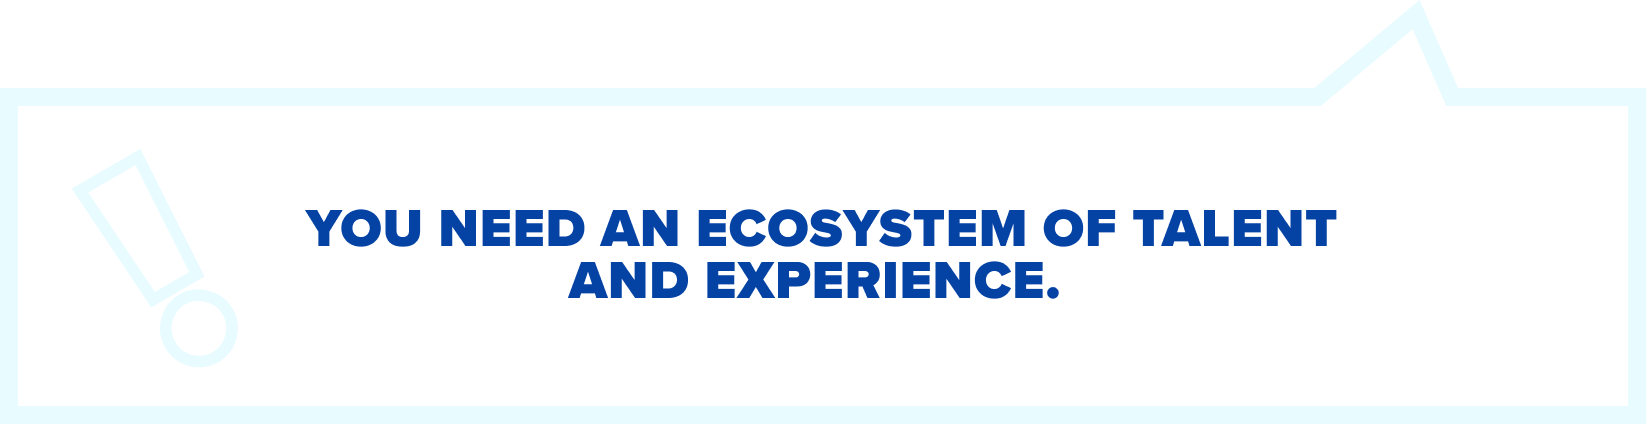 Ecosystem of Talent and Experience